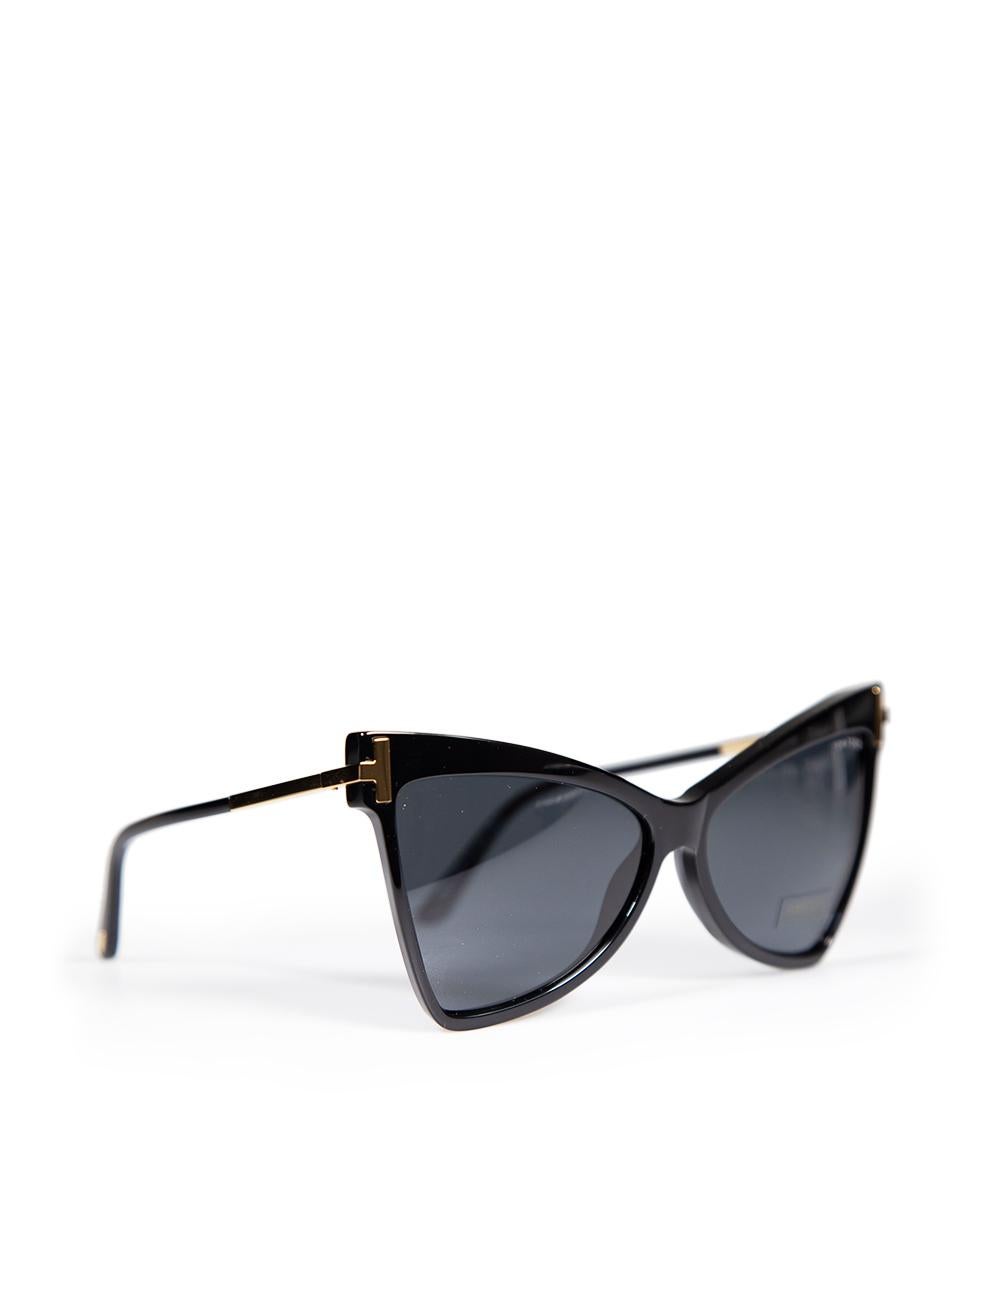 Tom Ford Tallulah Shiny Black Butterfly Sunglasses In New Condition For Sale In London, GB